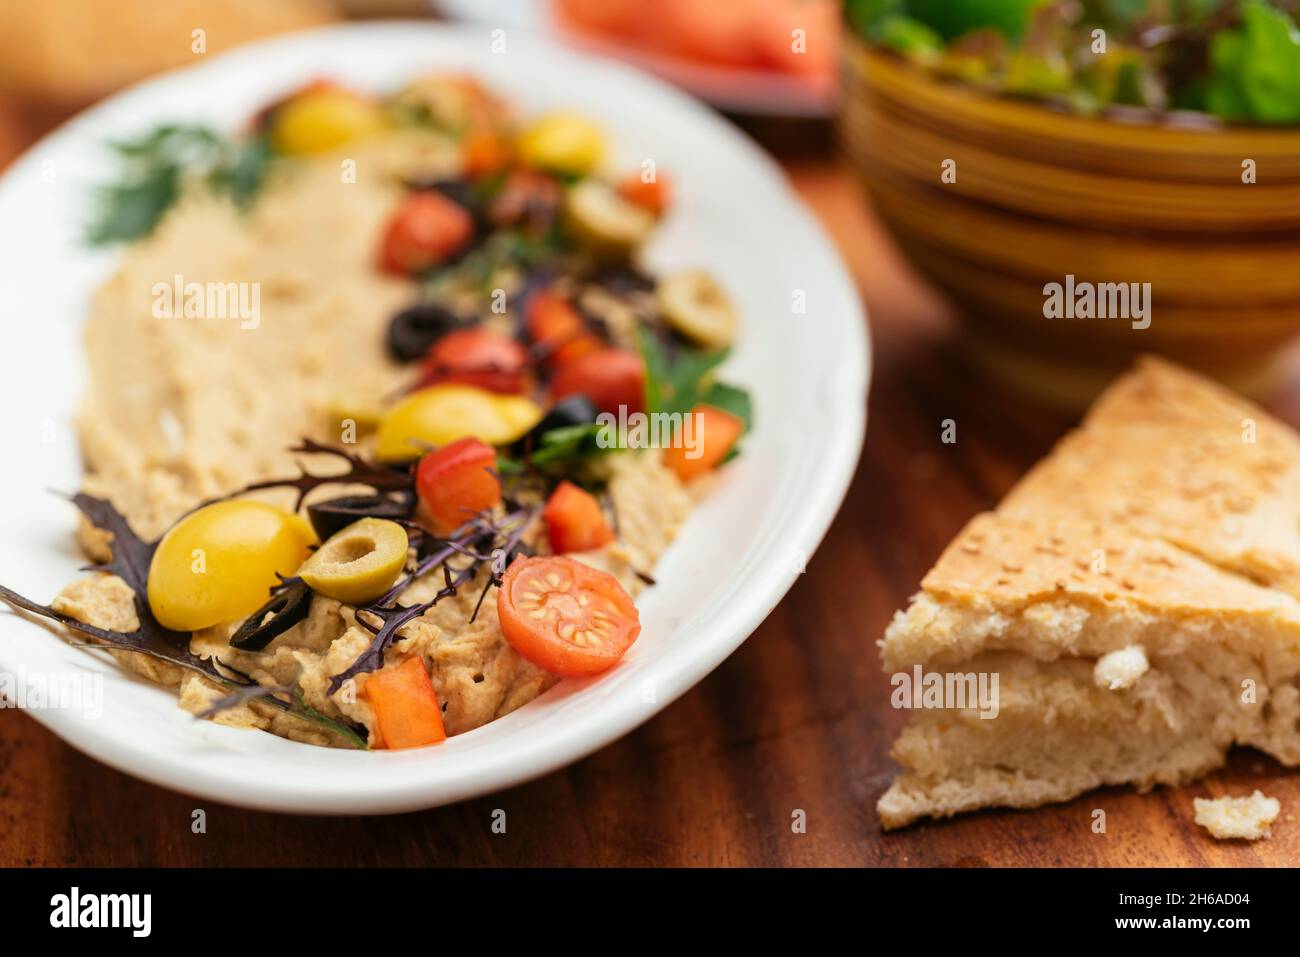 Home made hummus with flat bread. Stock Photo